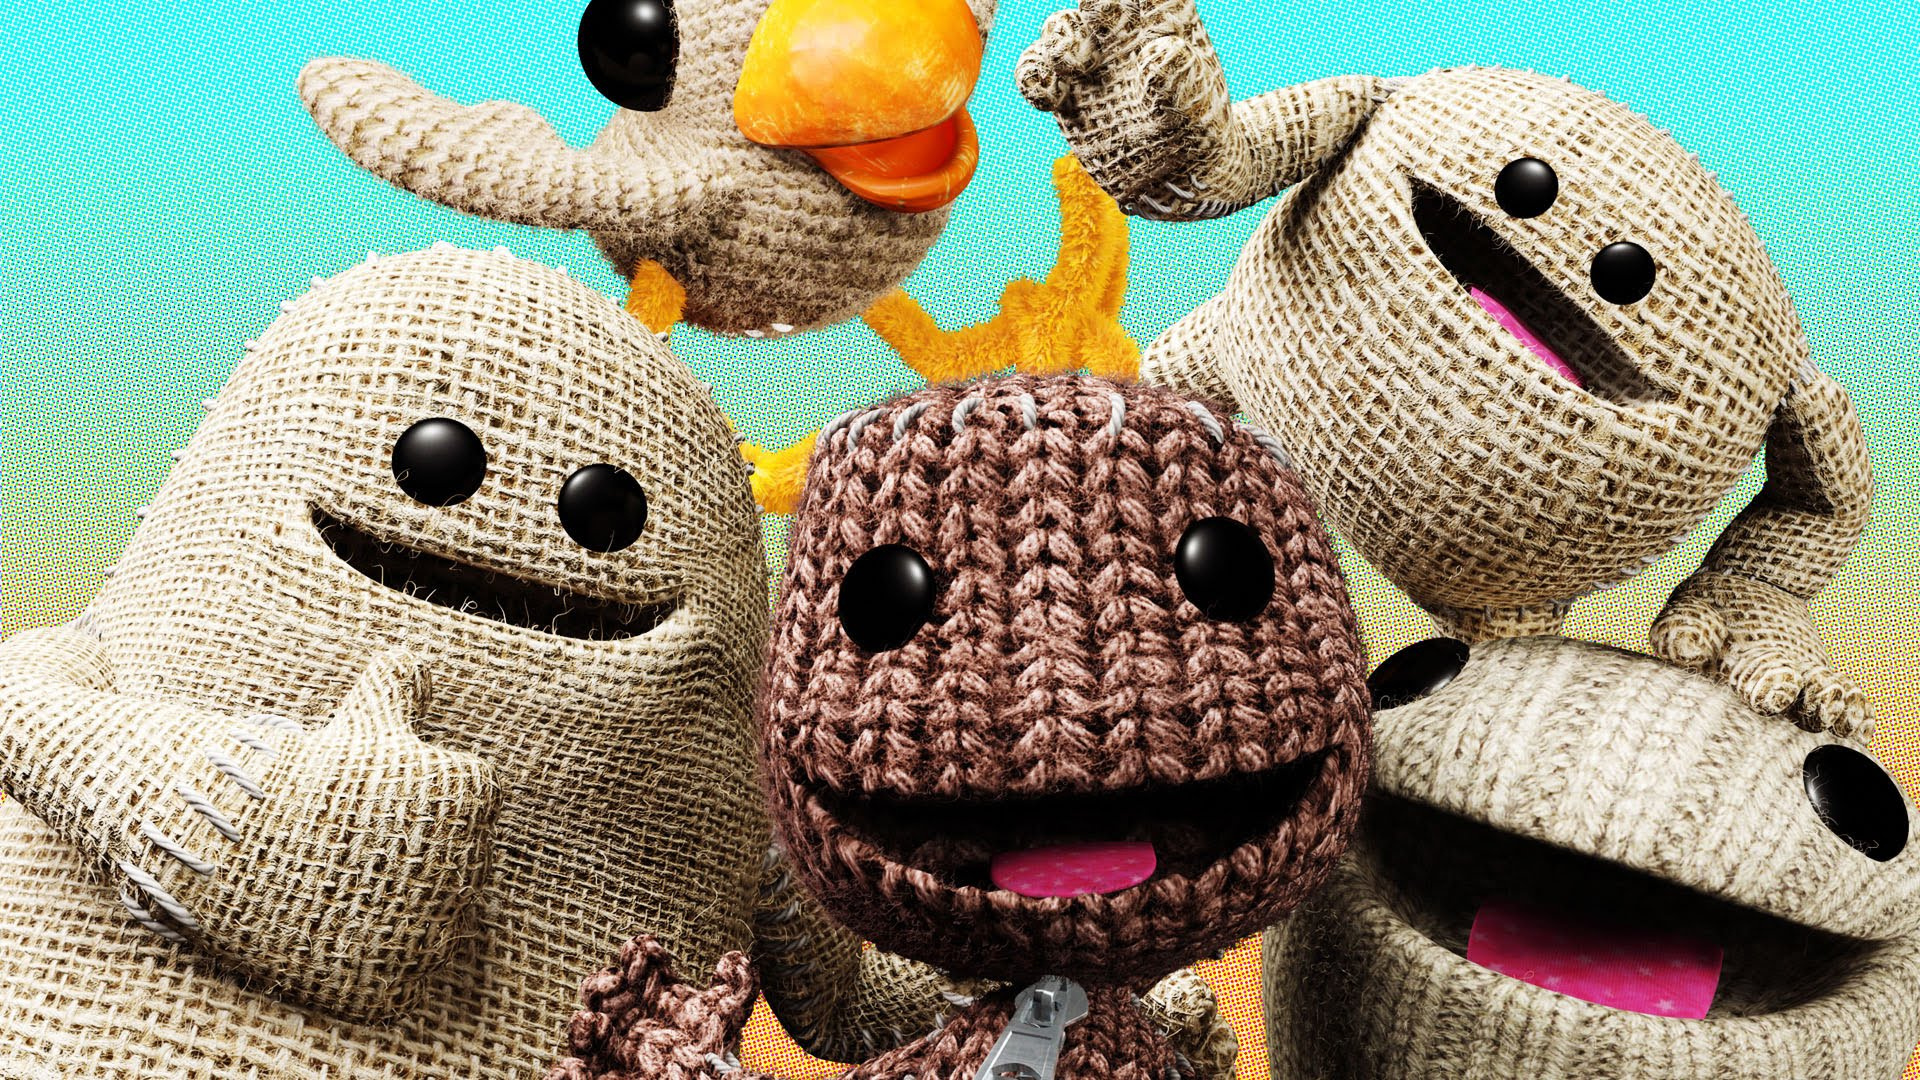 little big planet 3 playstation store